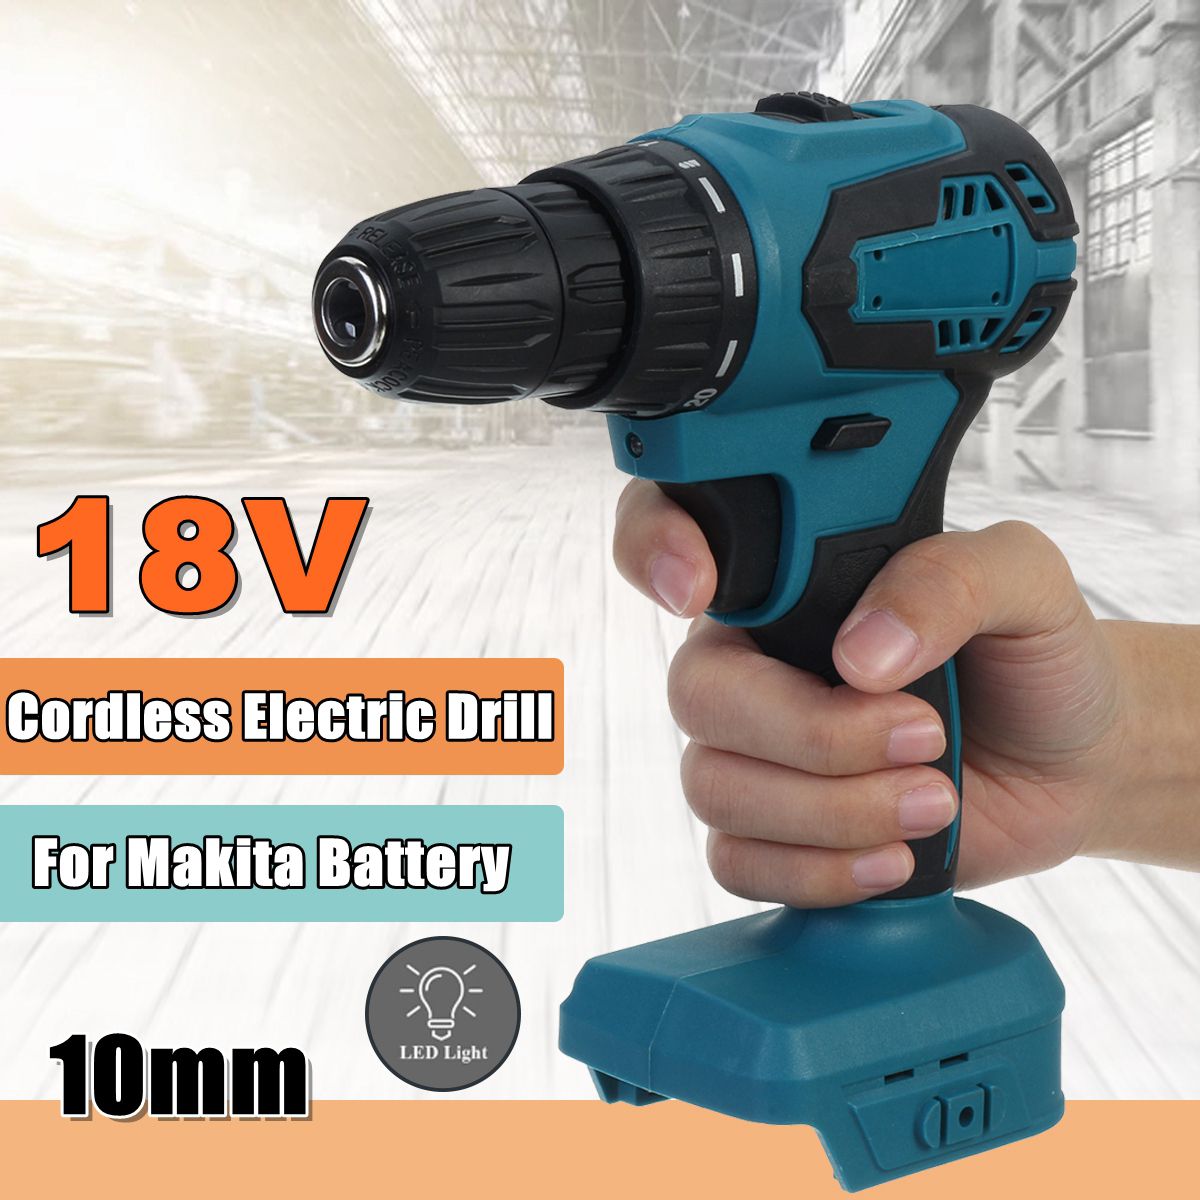 10mm-High-power-Cordless-Hand-Drill-Lithium-ion-Rechargeable-Electric-Drill-Driver-Multi-function-Sc-1704021